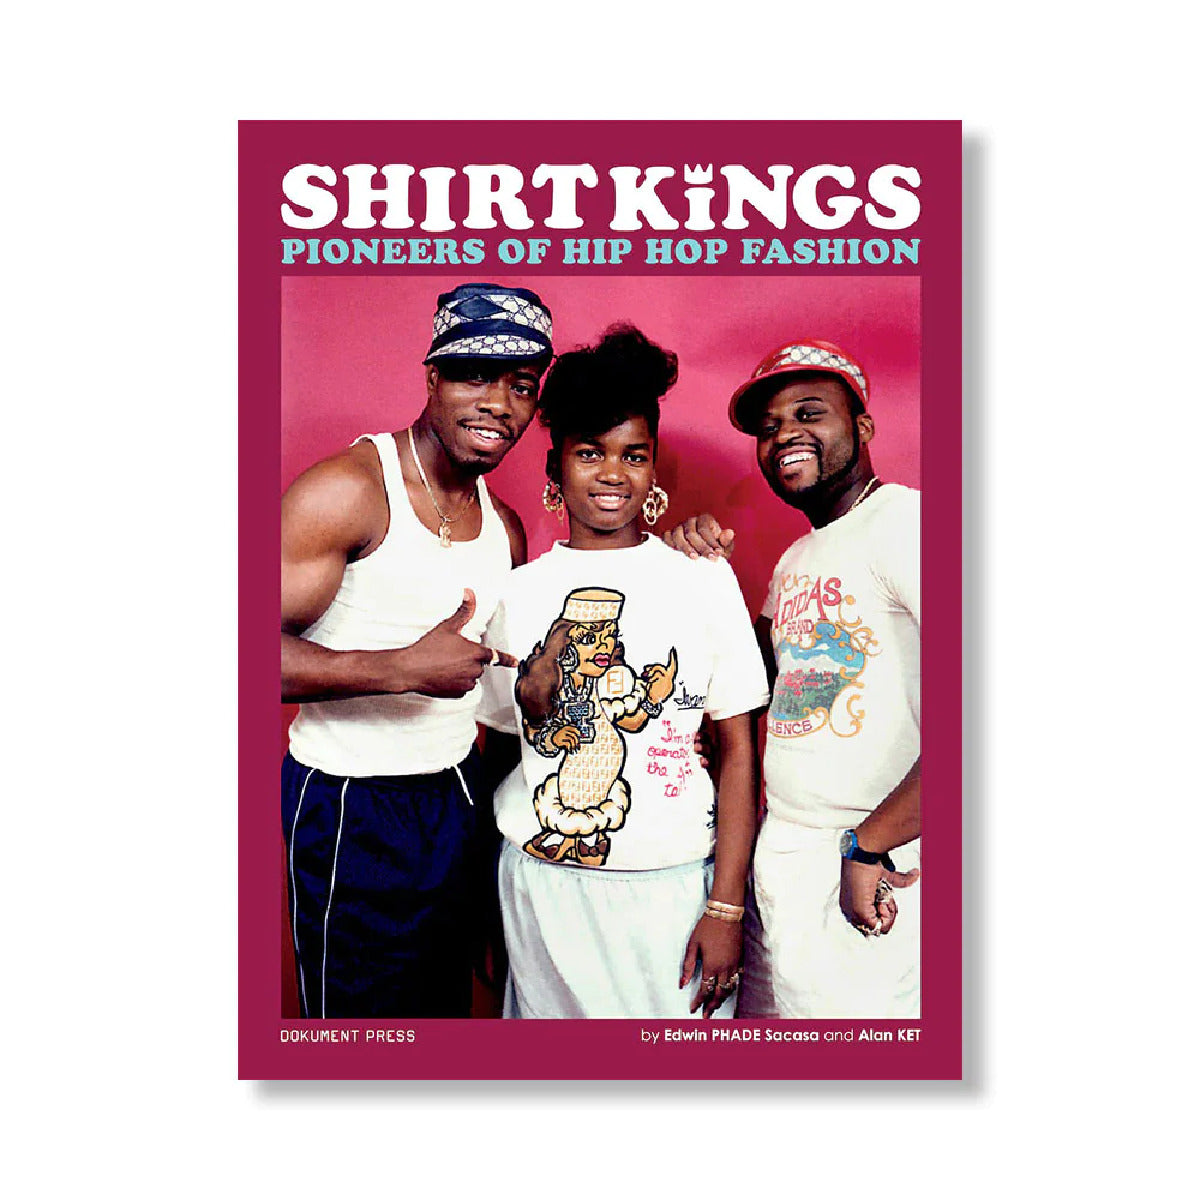 Shirt Kings: Pioneers of Hip Hop Fashion - Signed